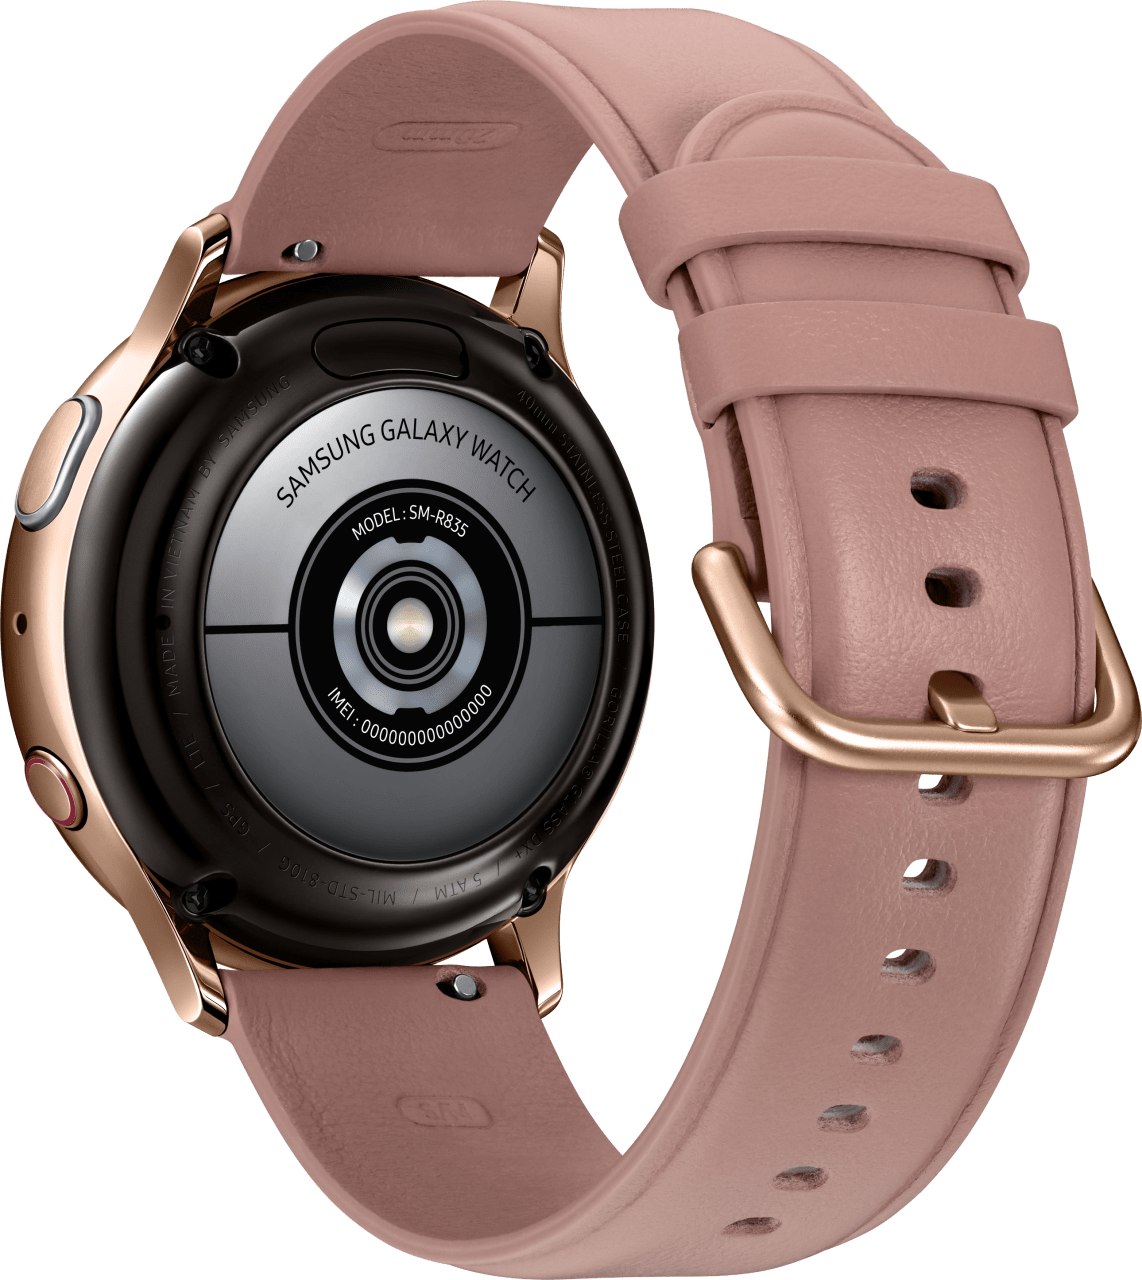 Oro Samsung Galaxy Watch Active2 (LTE), 40mm Stainless steel case, Leather band.3